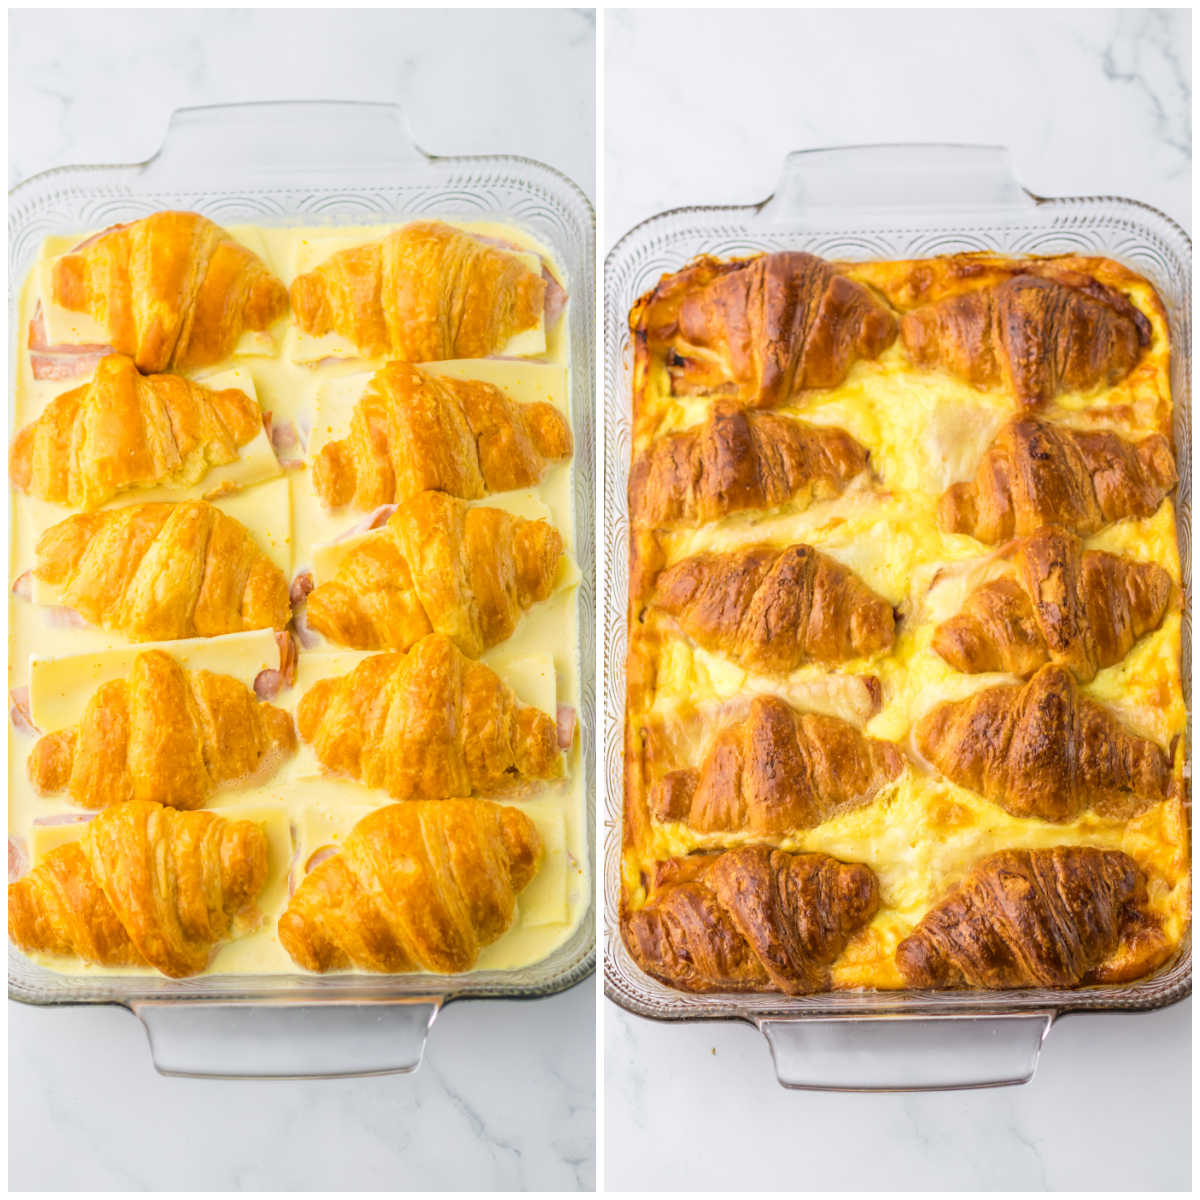 Steps to make Ham and Swiss Croissant Bake. 